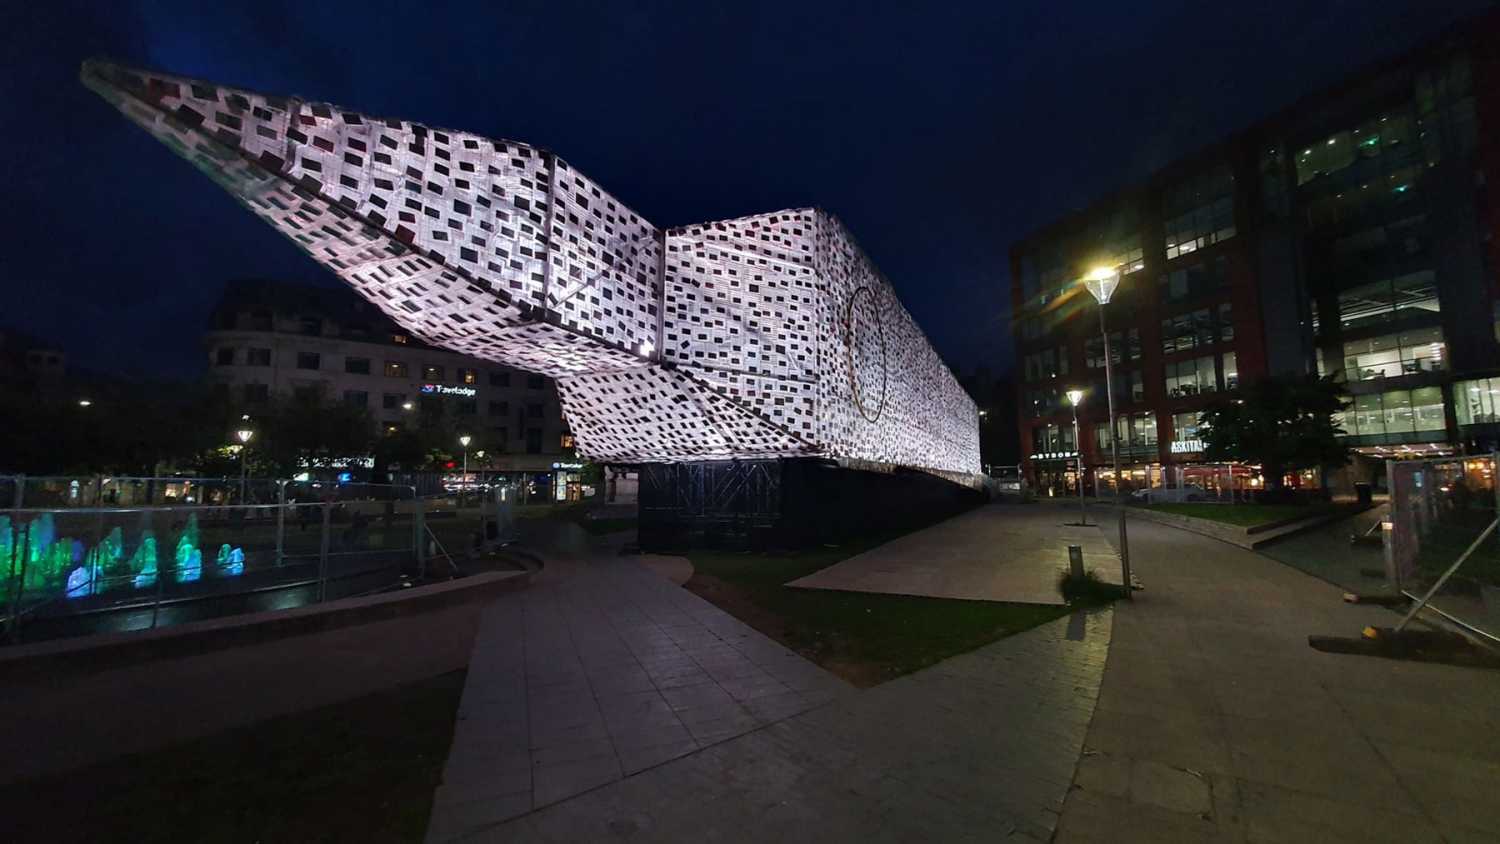 The work takes the London landmark and turns it on its side in Piccadilly Gardens